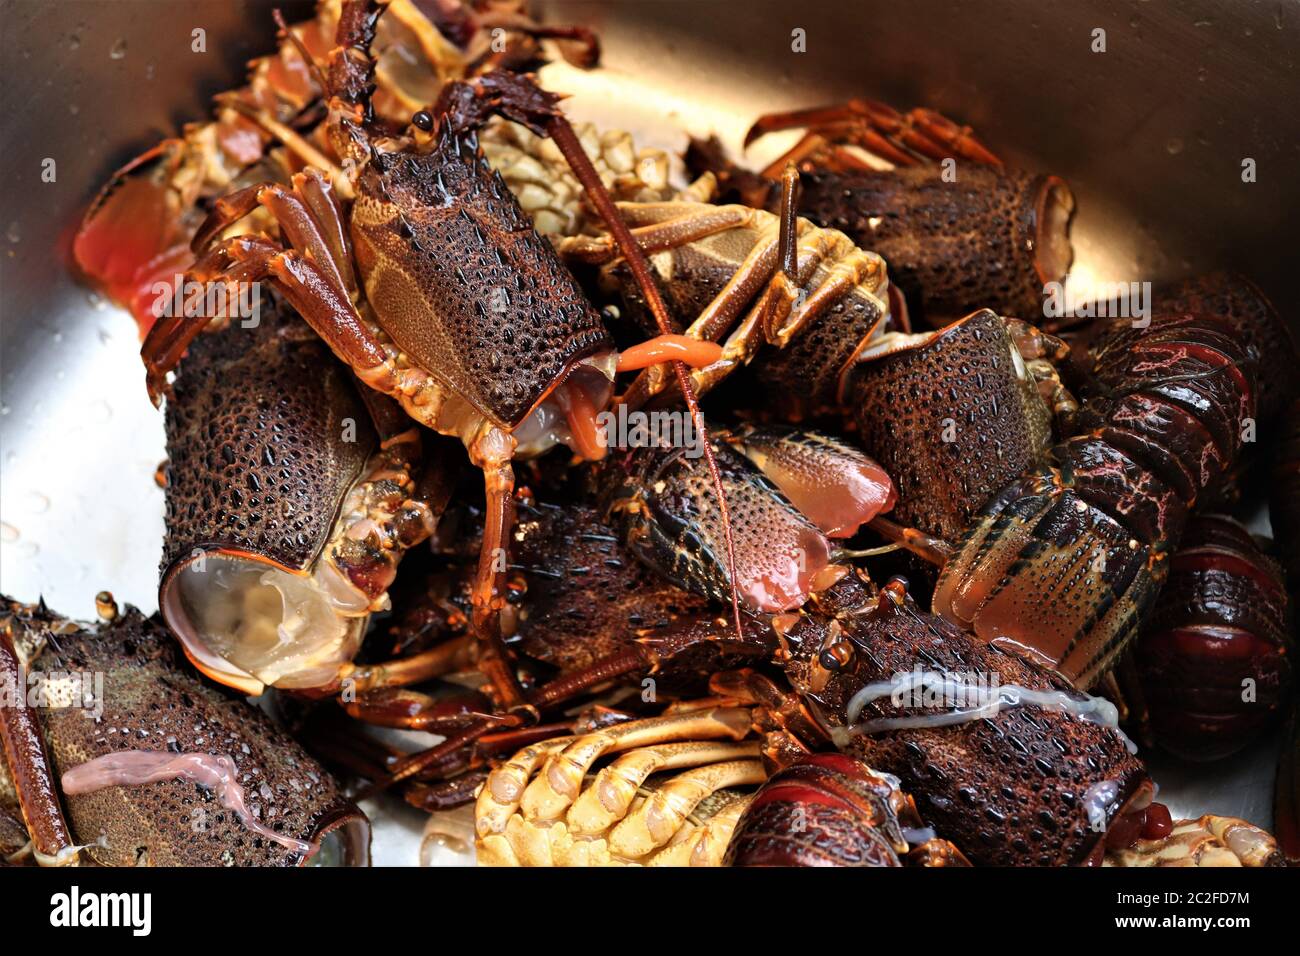 Jasus lalandii also called the Cape rock lobster or West Coast rock lobster is a species of spiny lobster found off the coast of Southern Africa.They Stock Photo